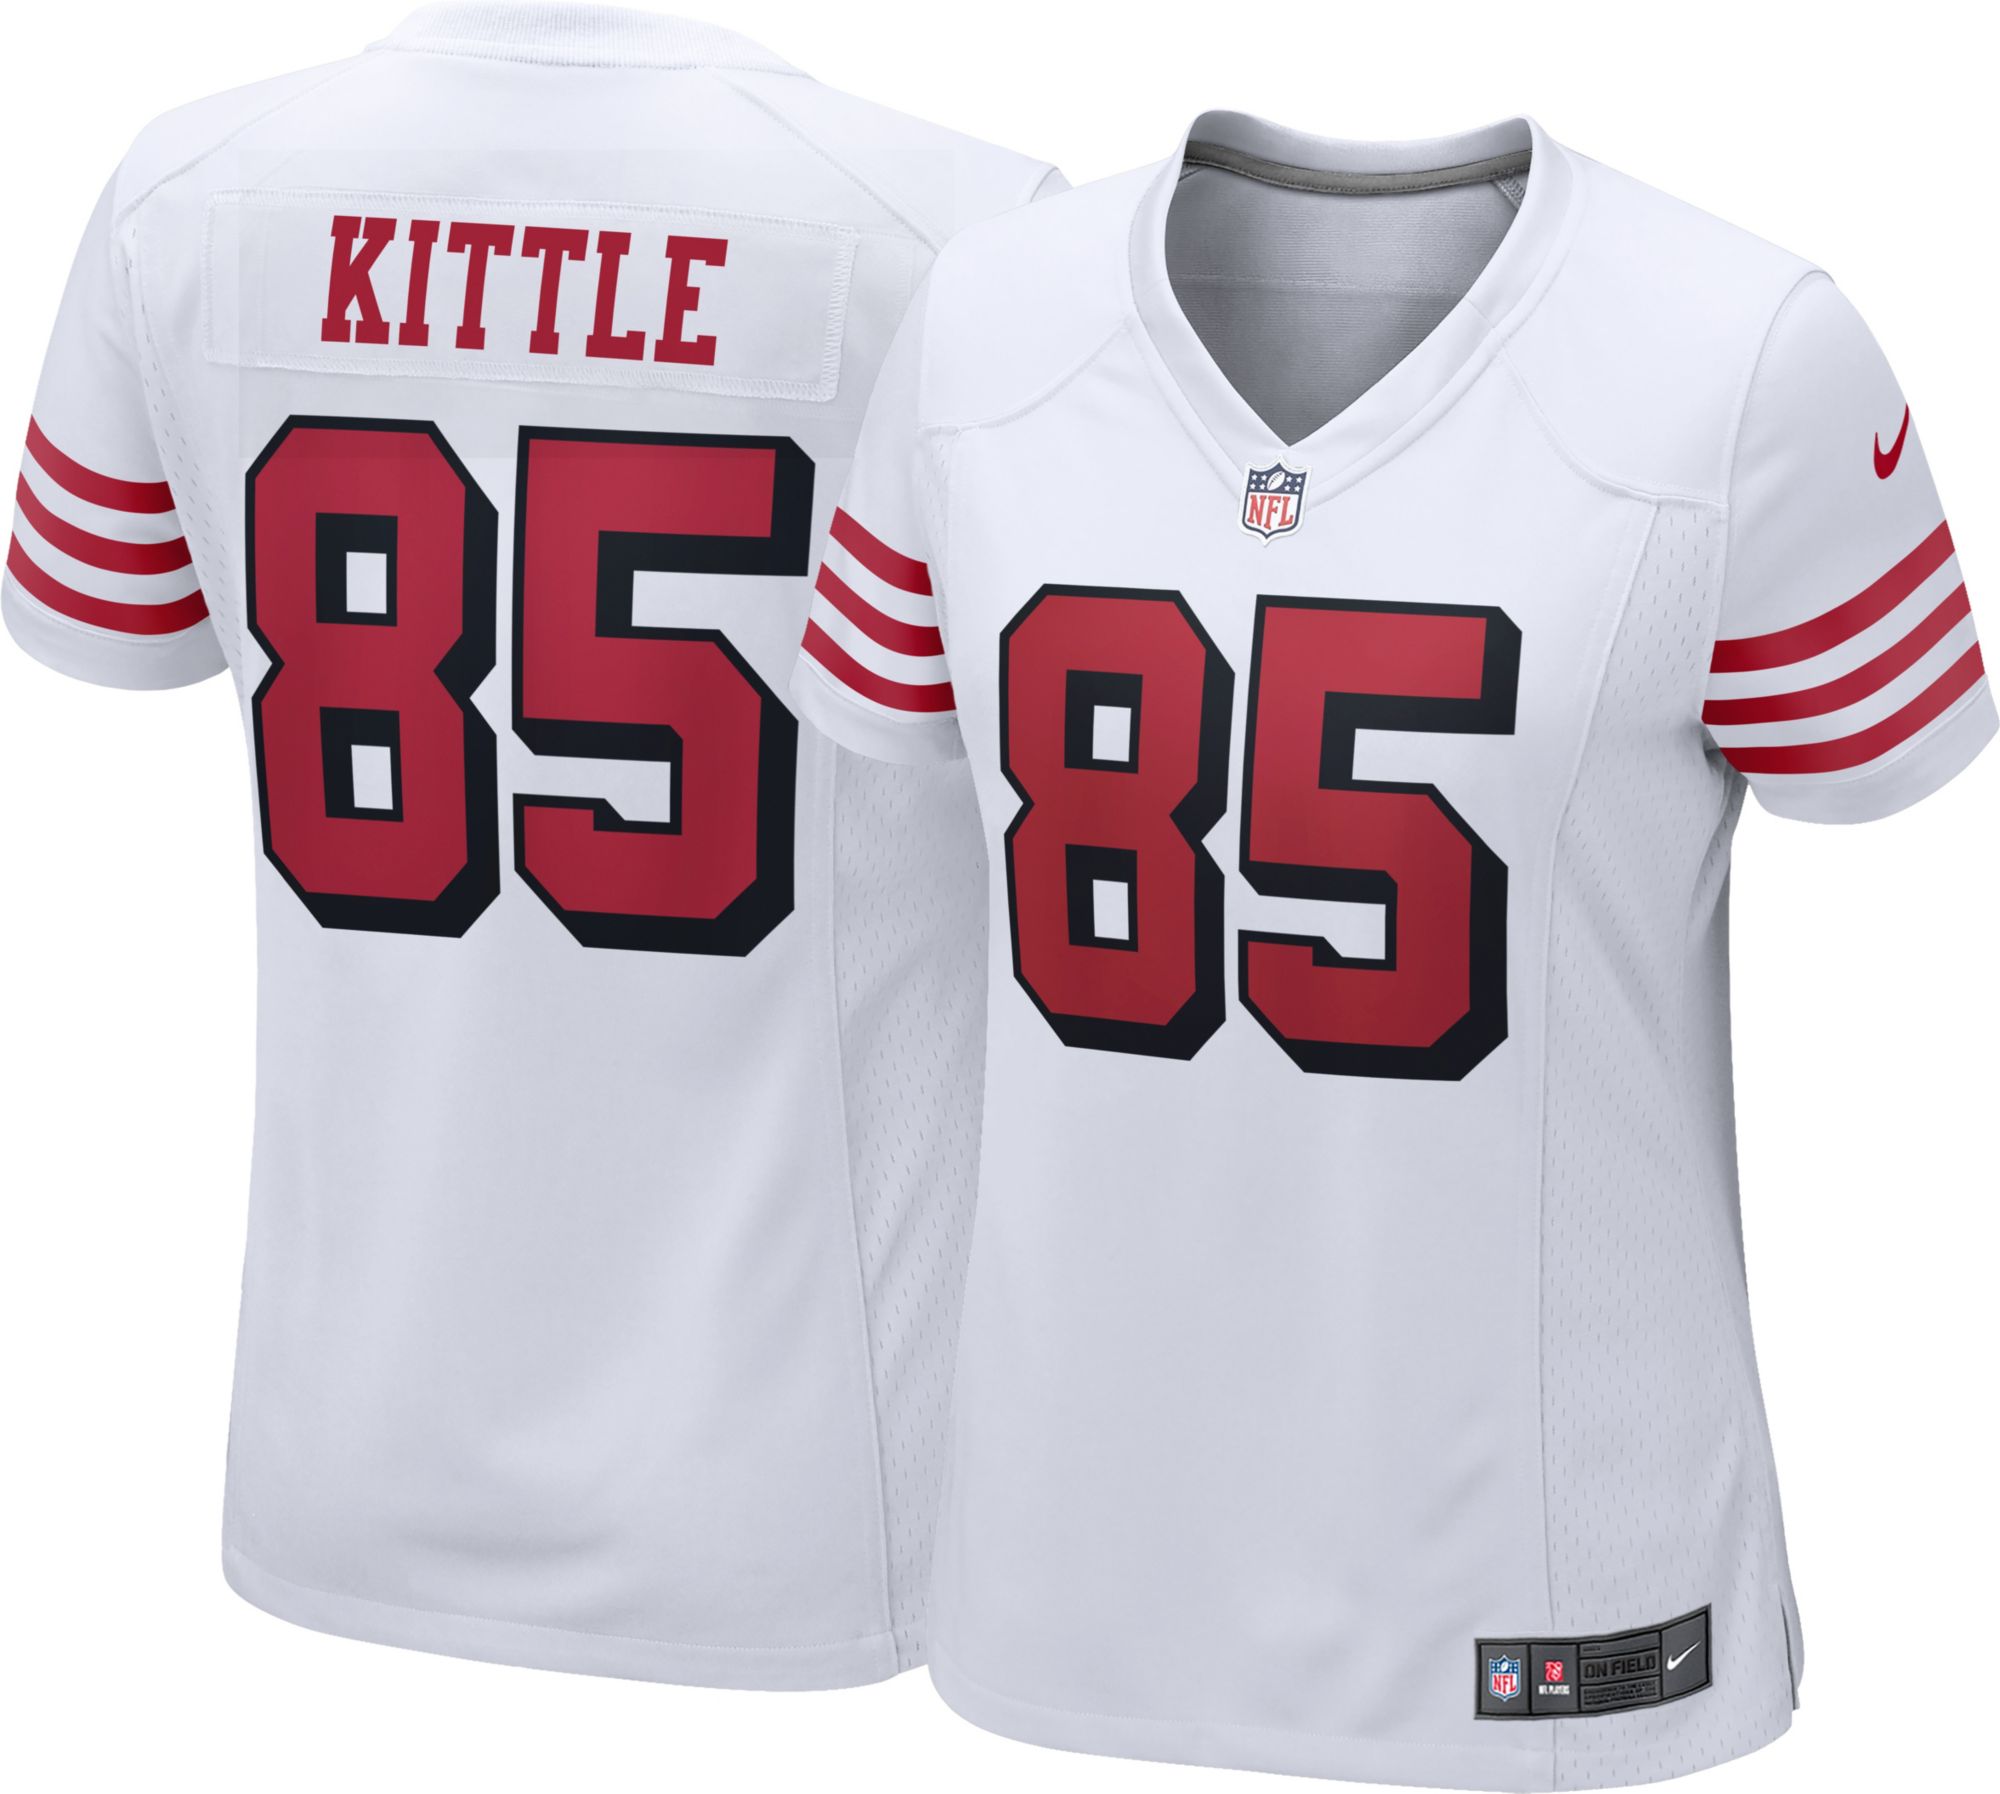 george kittle white jersey